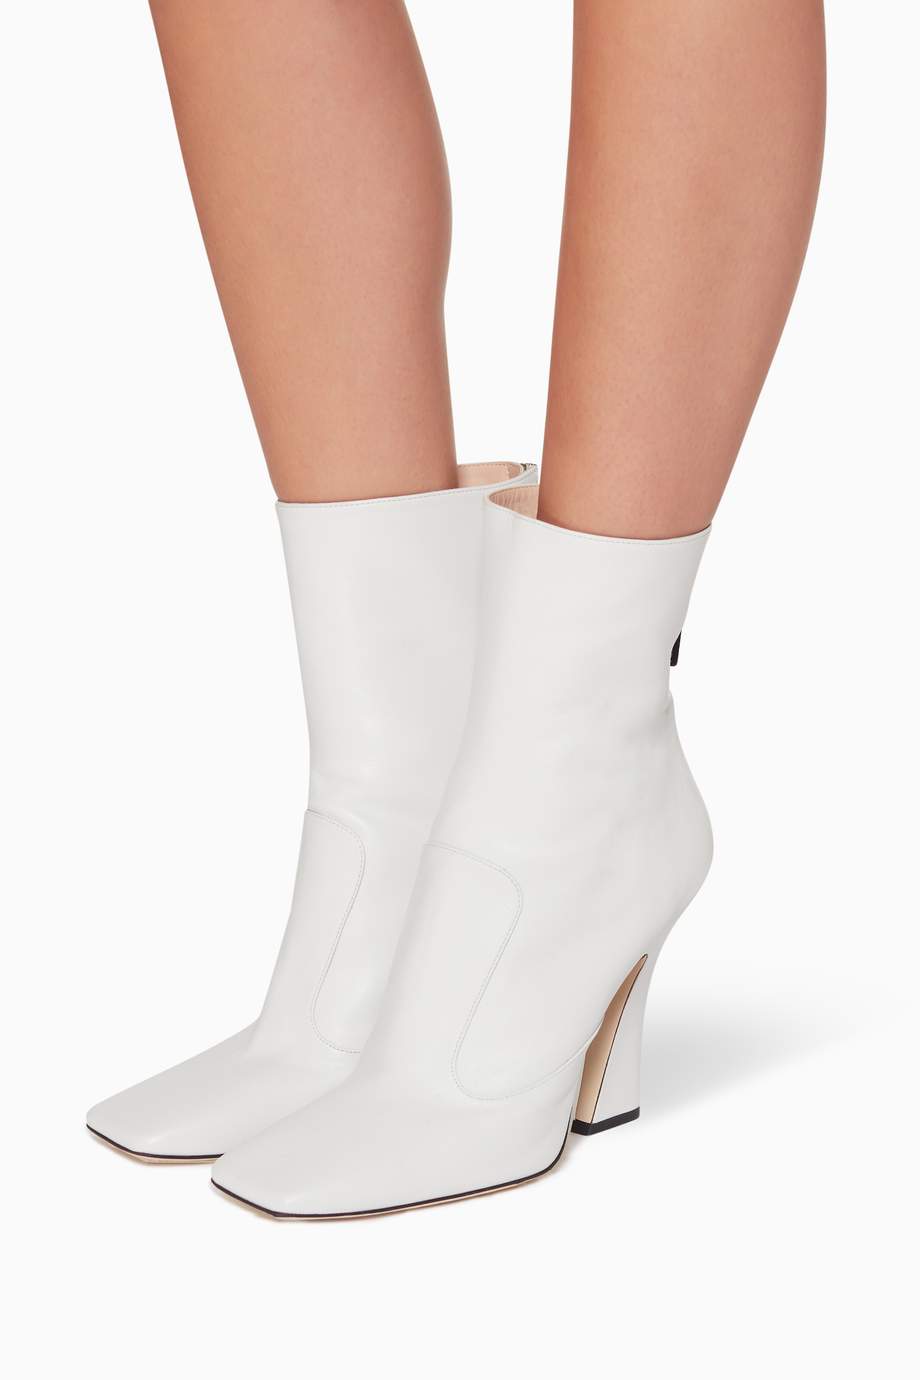 Shop Fendi White Square-Toe Leather Ankle Boots for Women | Ounass UAE